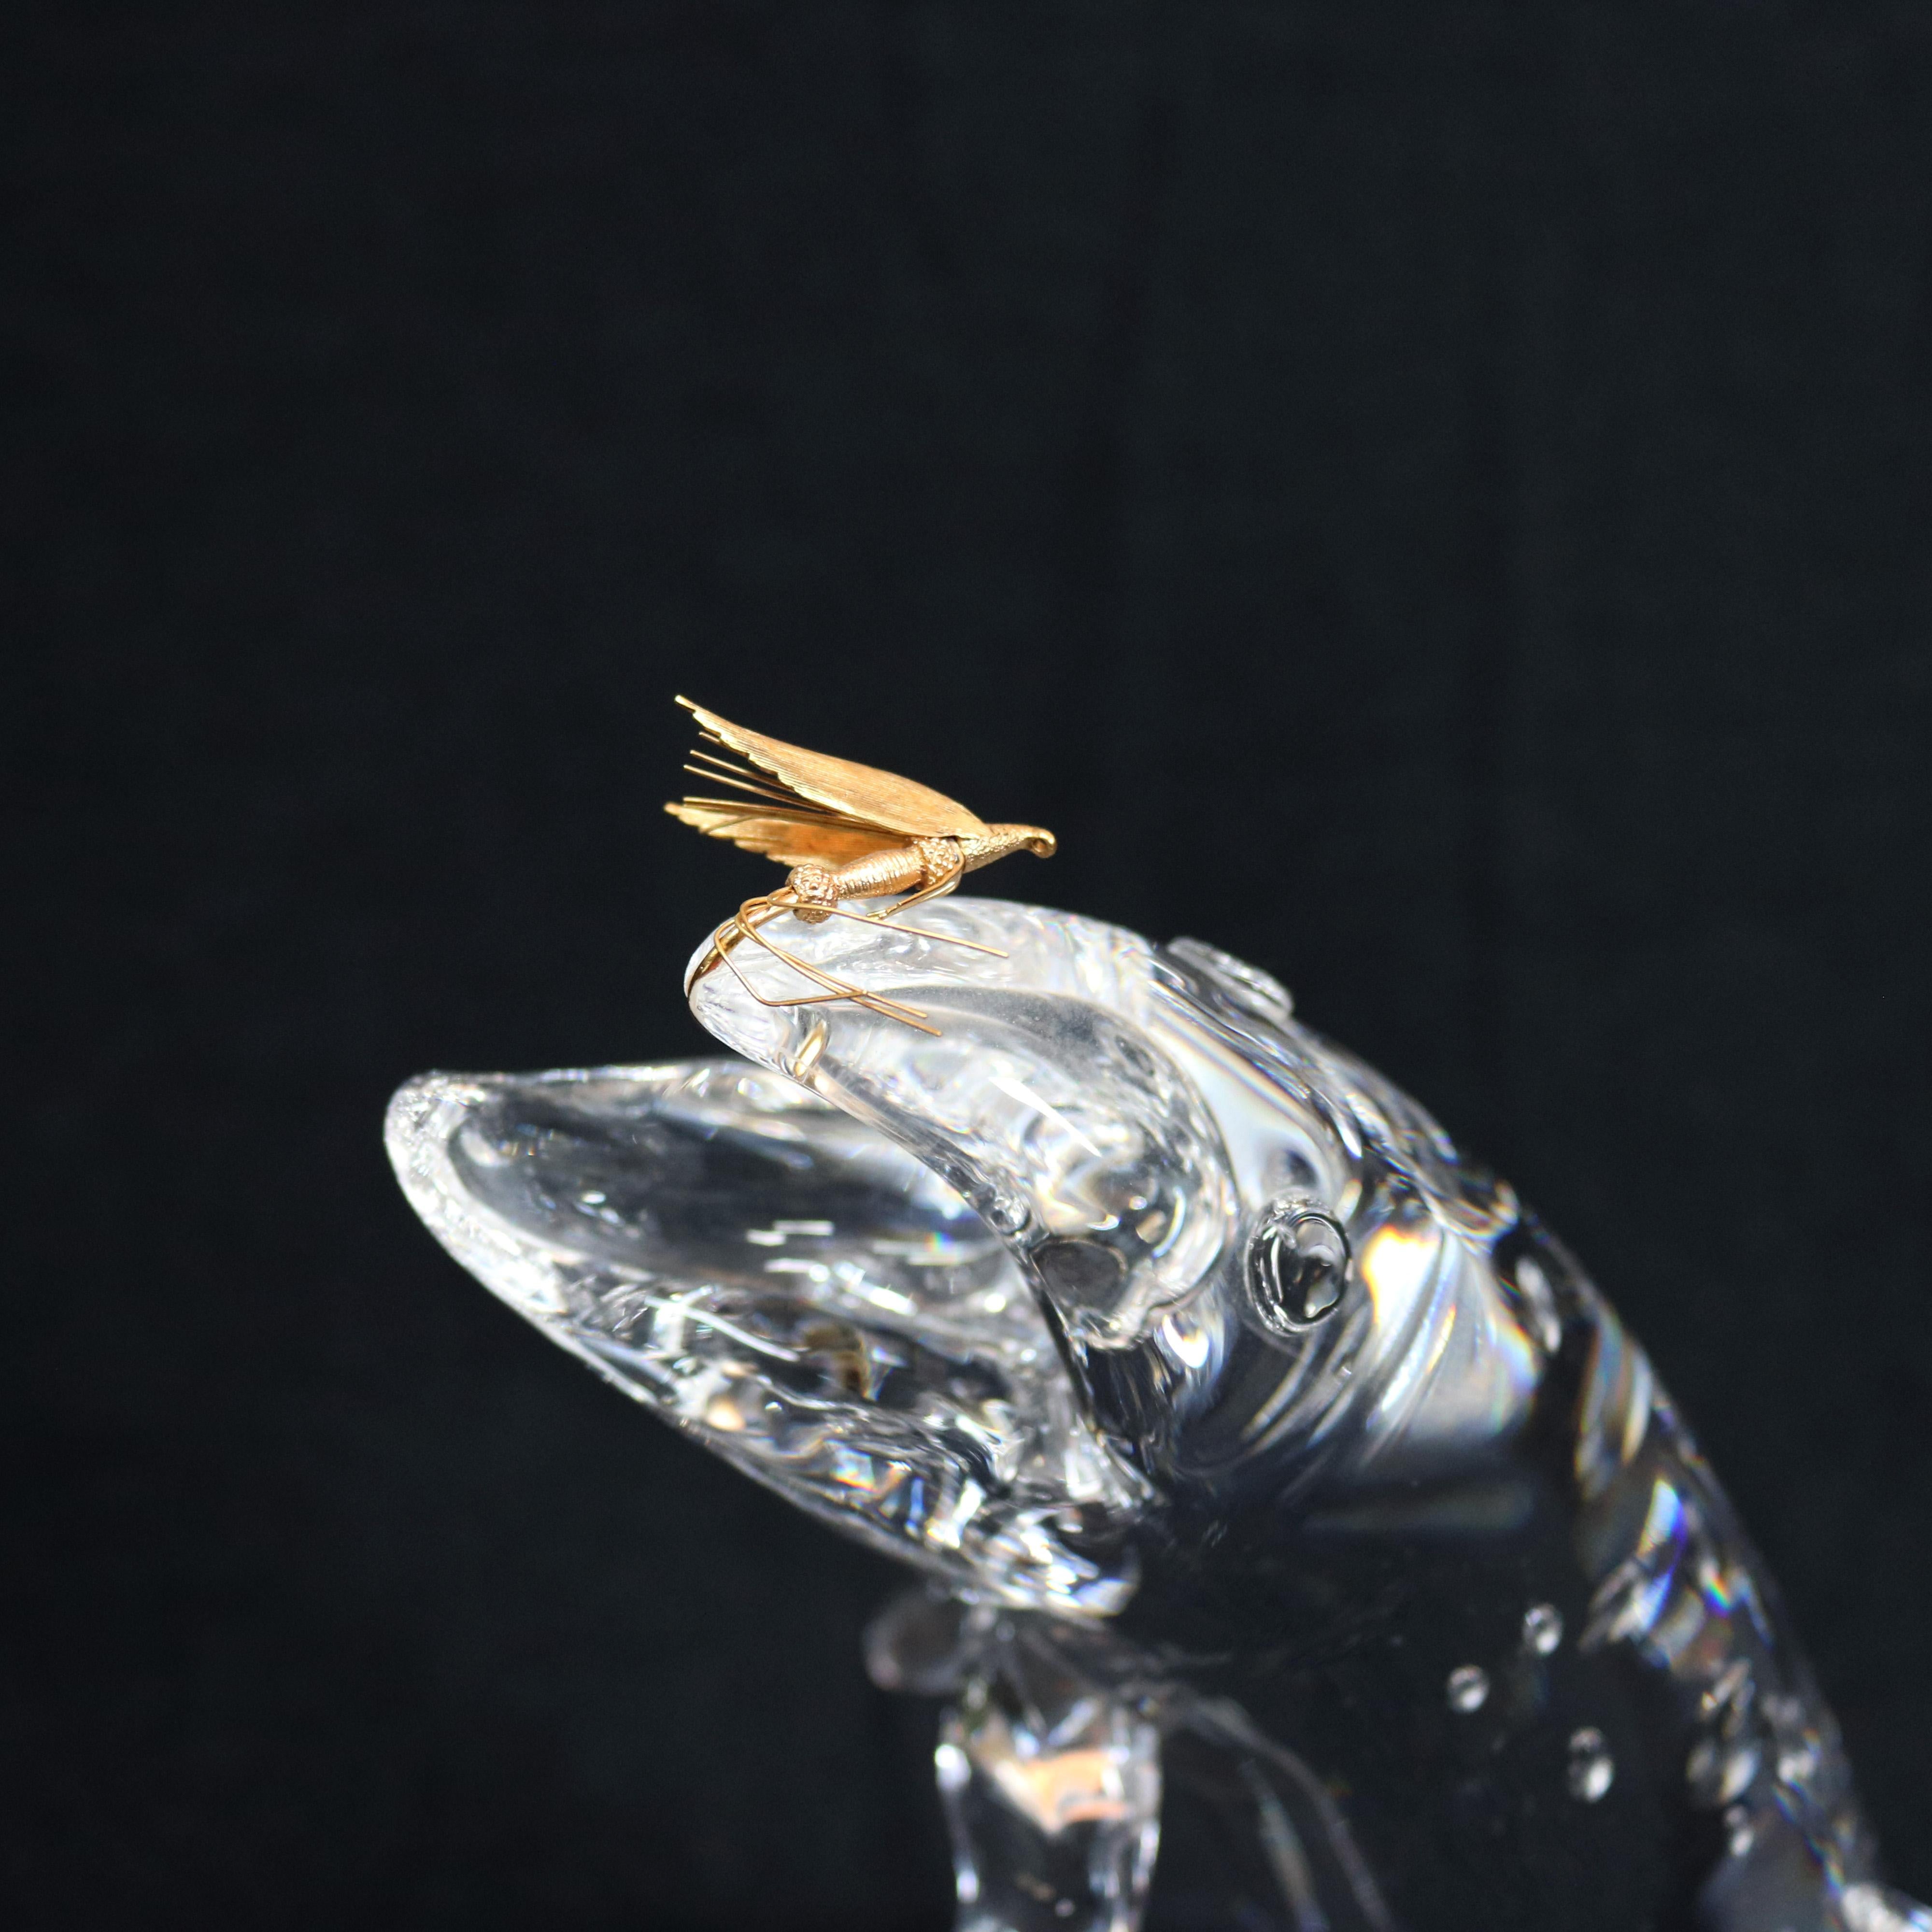 20th Century Steuben Figurative Crystal and Gold Sculpture Paperweight, Trout & Fly, Signed